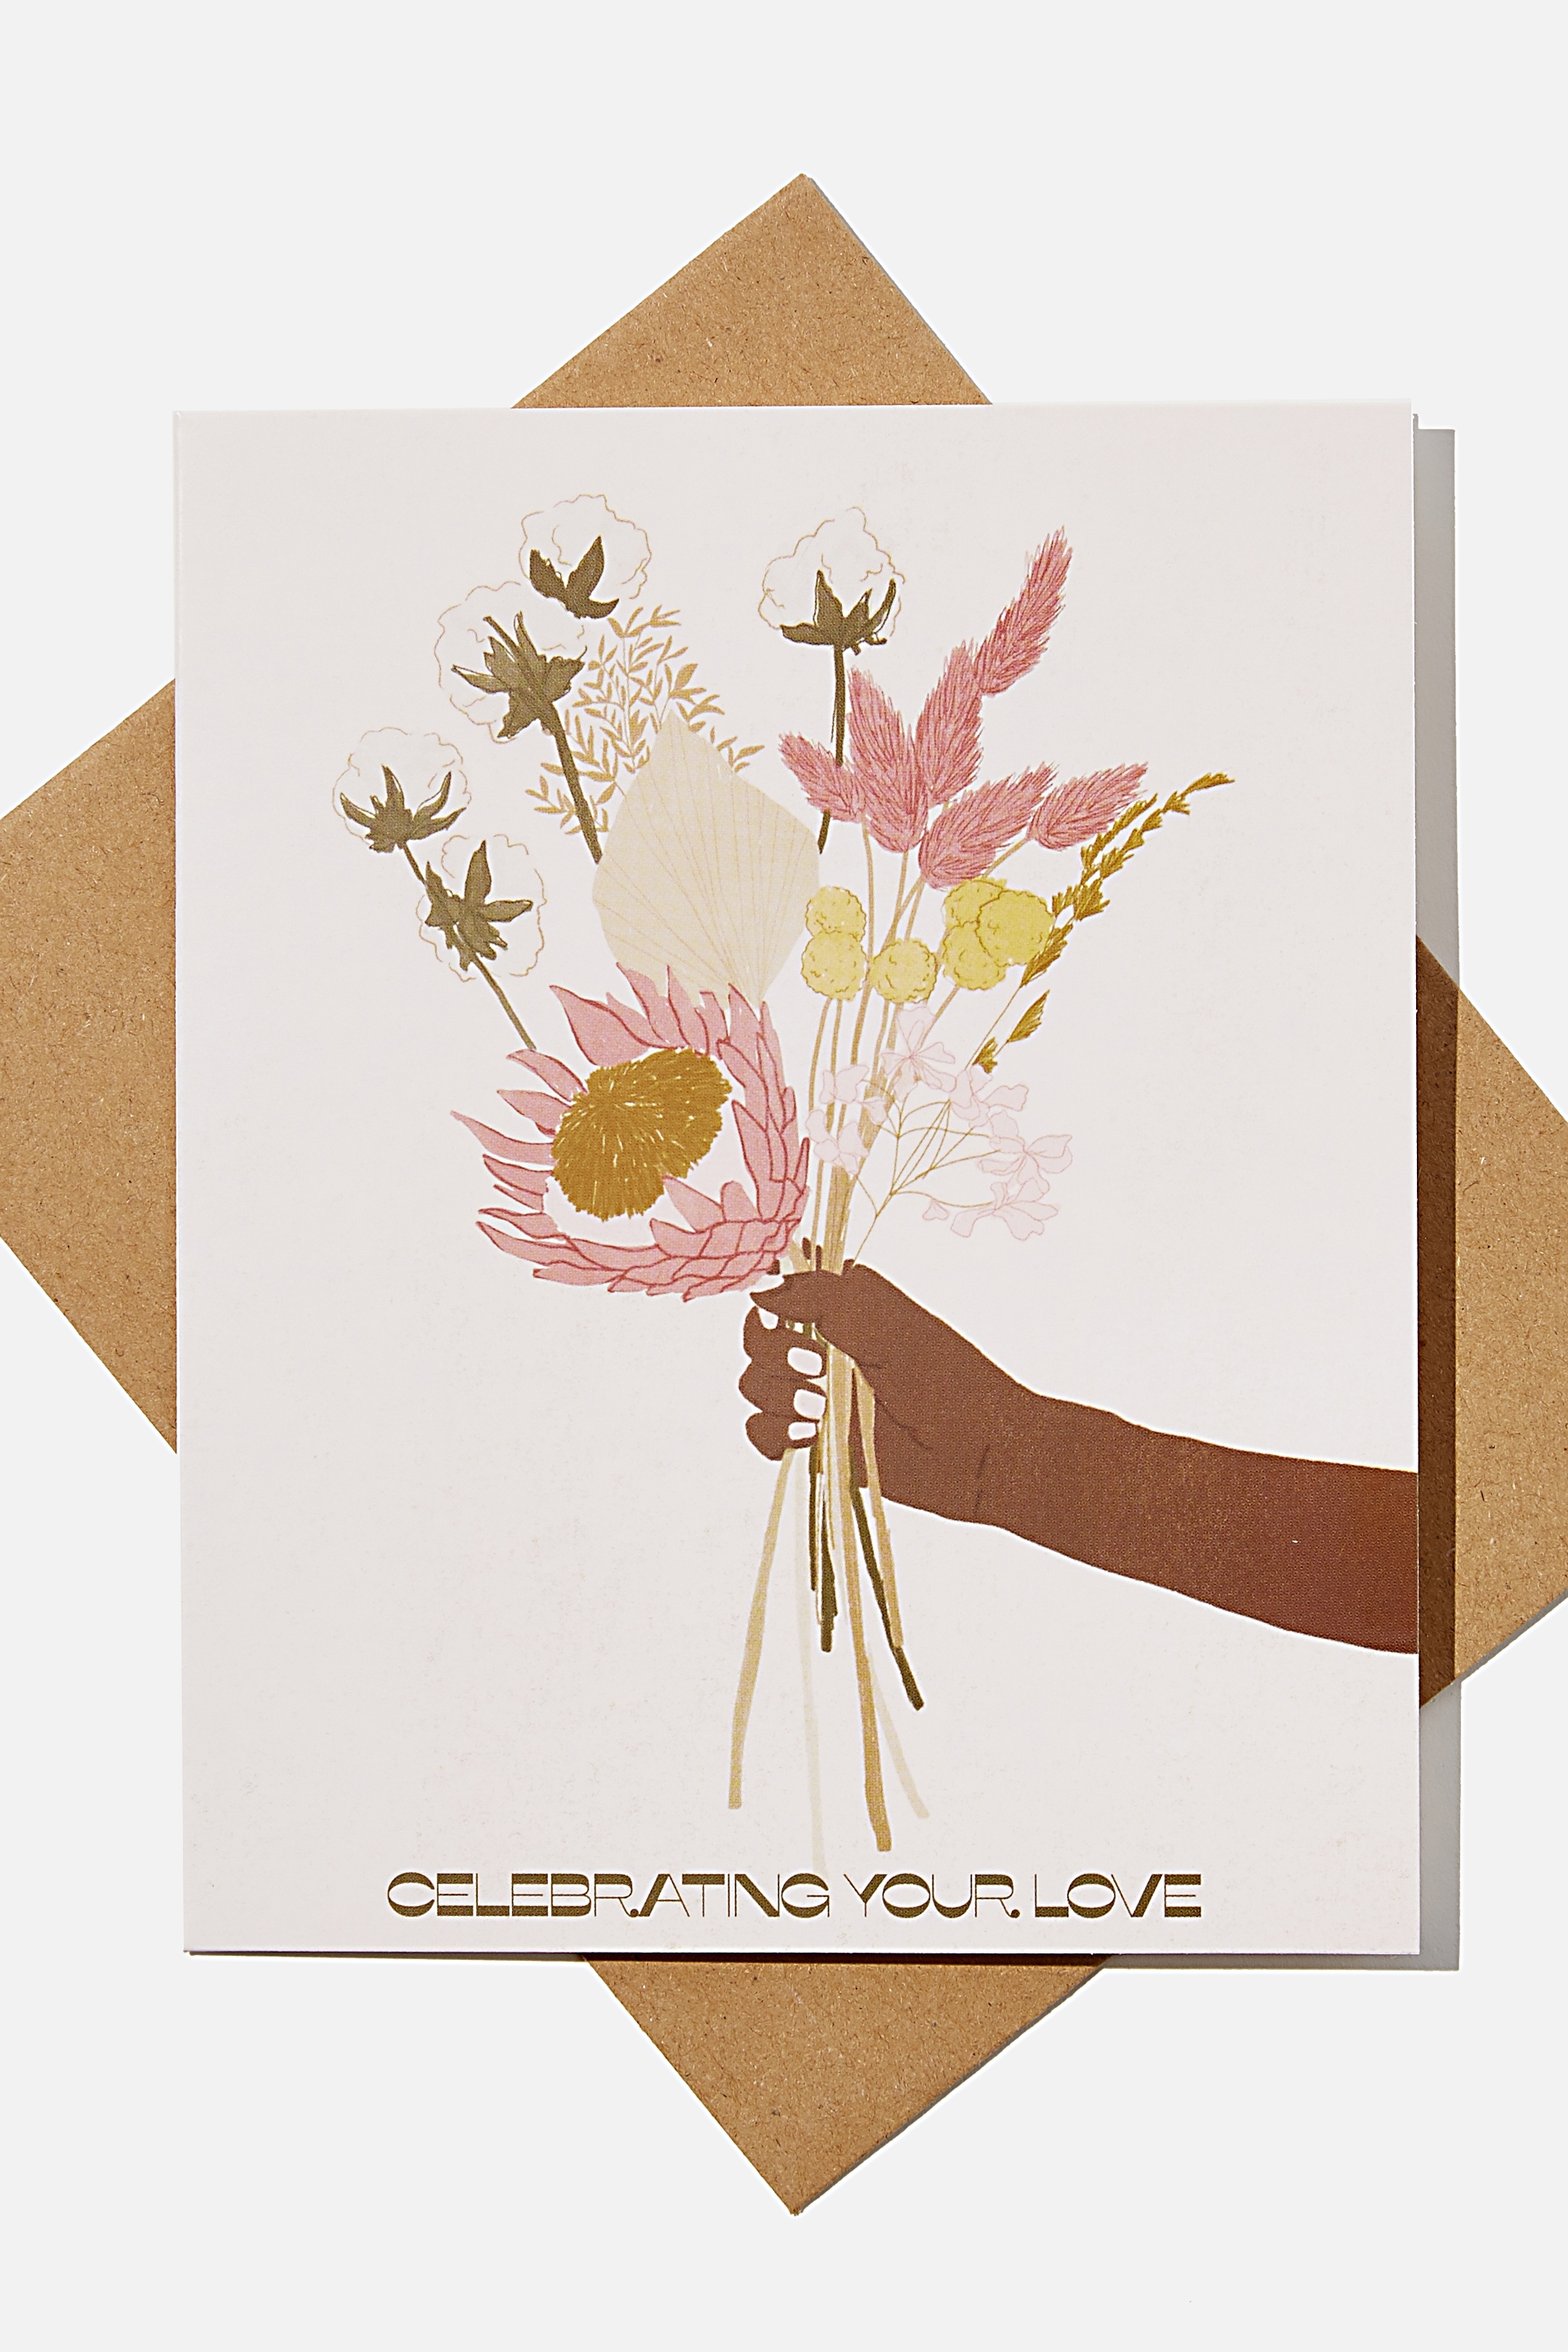 Typo - Wedding Card - Celebrating your love bouquet